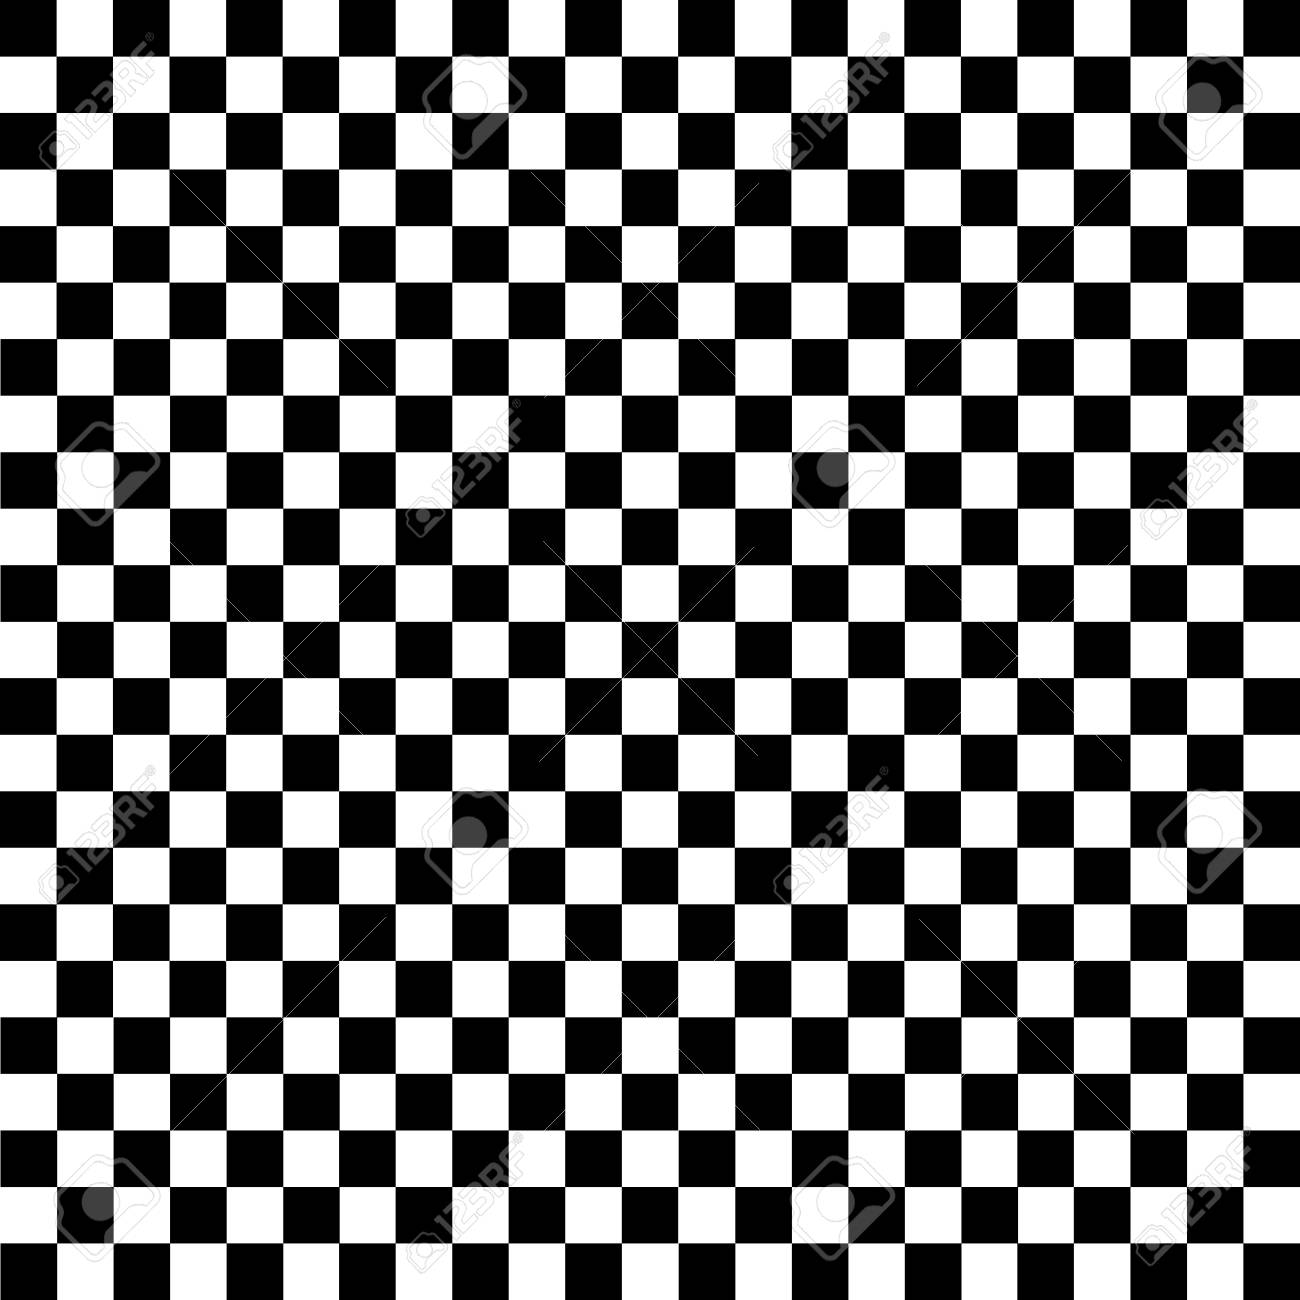 Black And White Checkered Background Chess Pattern Vector